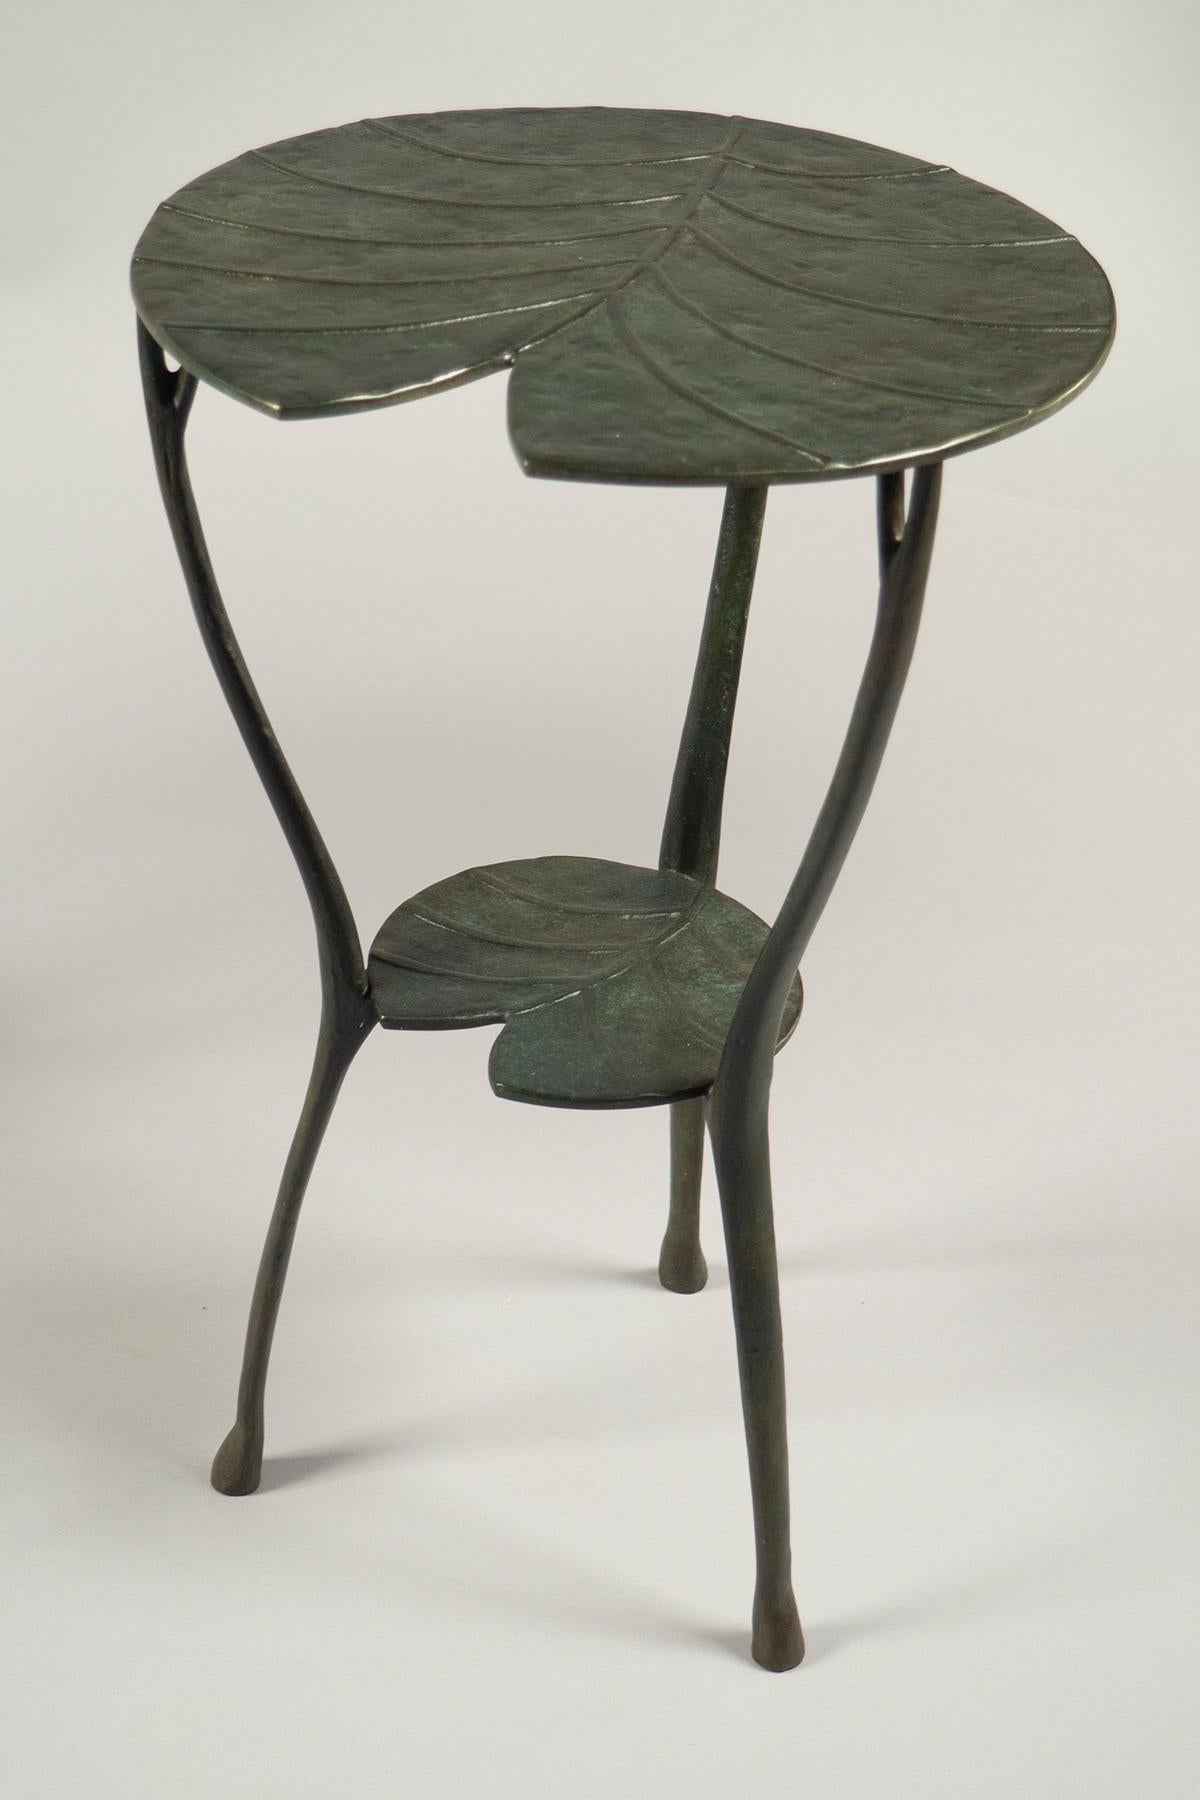 Cast bronze two-tier tables with their surfaces in the shape of water lilies, finished a dark green patina. Limited editions 3+4/99.
Custom sizes and finishes available.